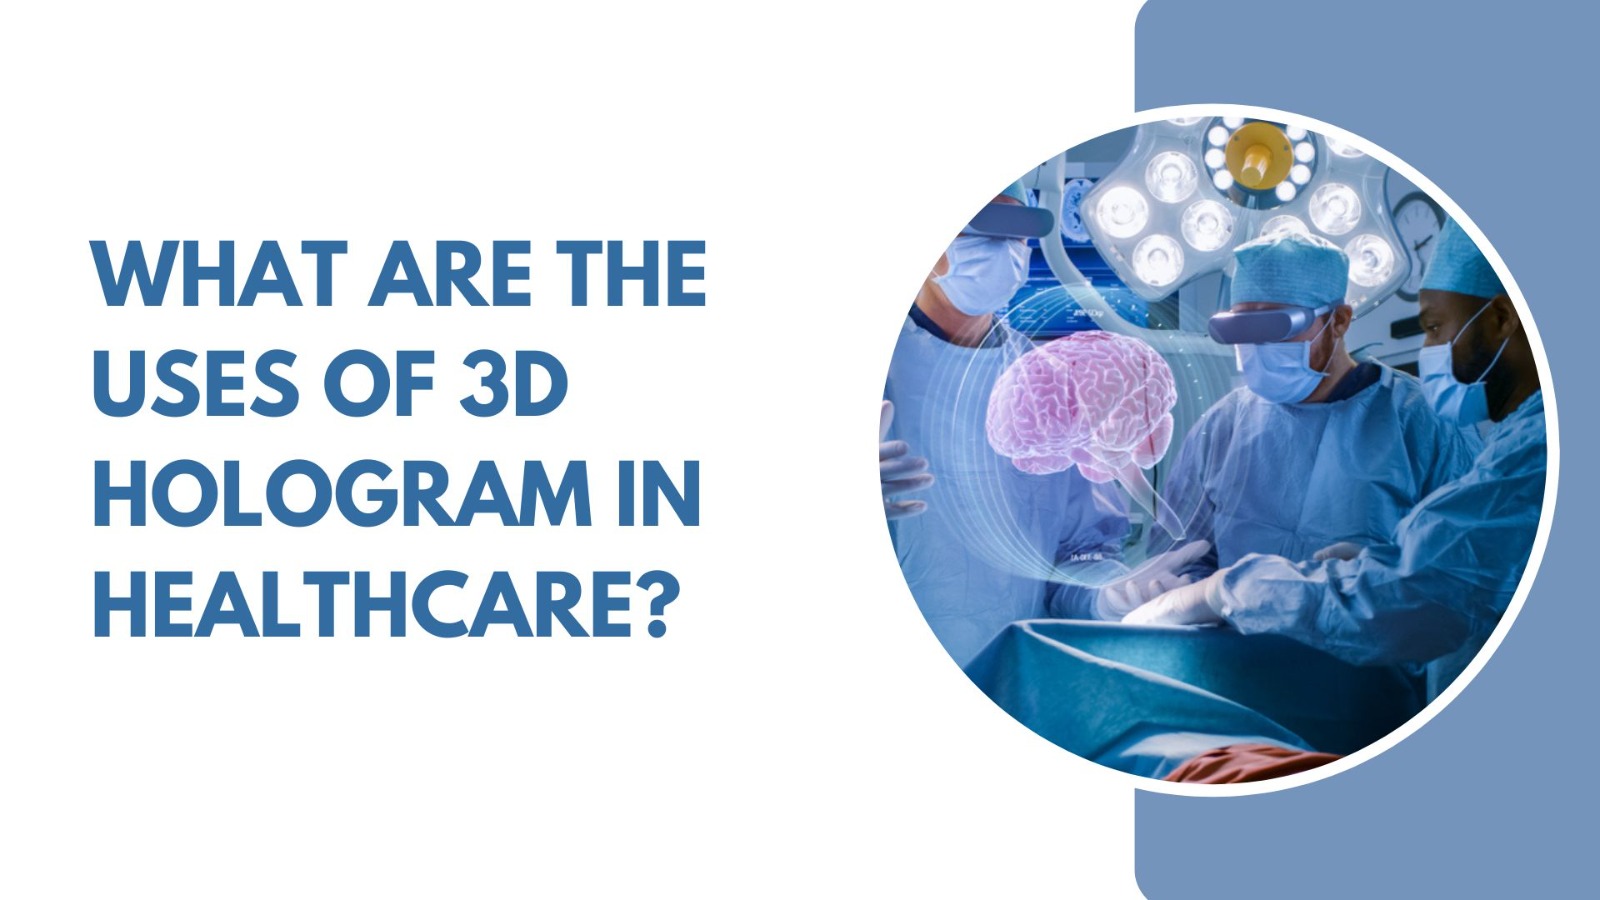 What are the Uses of 3D Holograms in Healthcare?